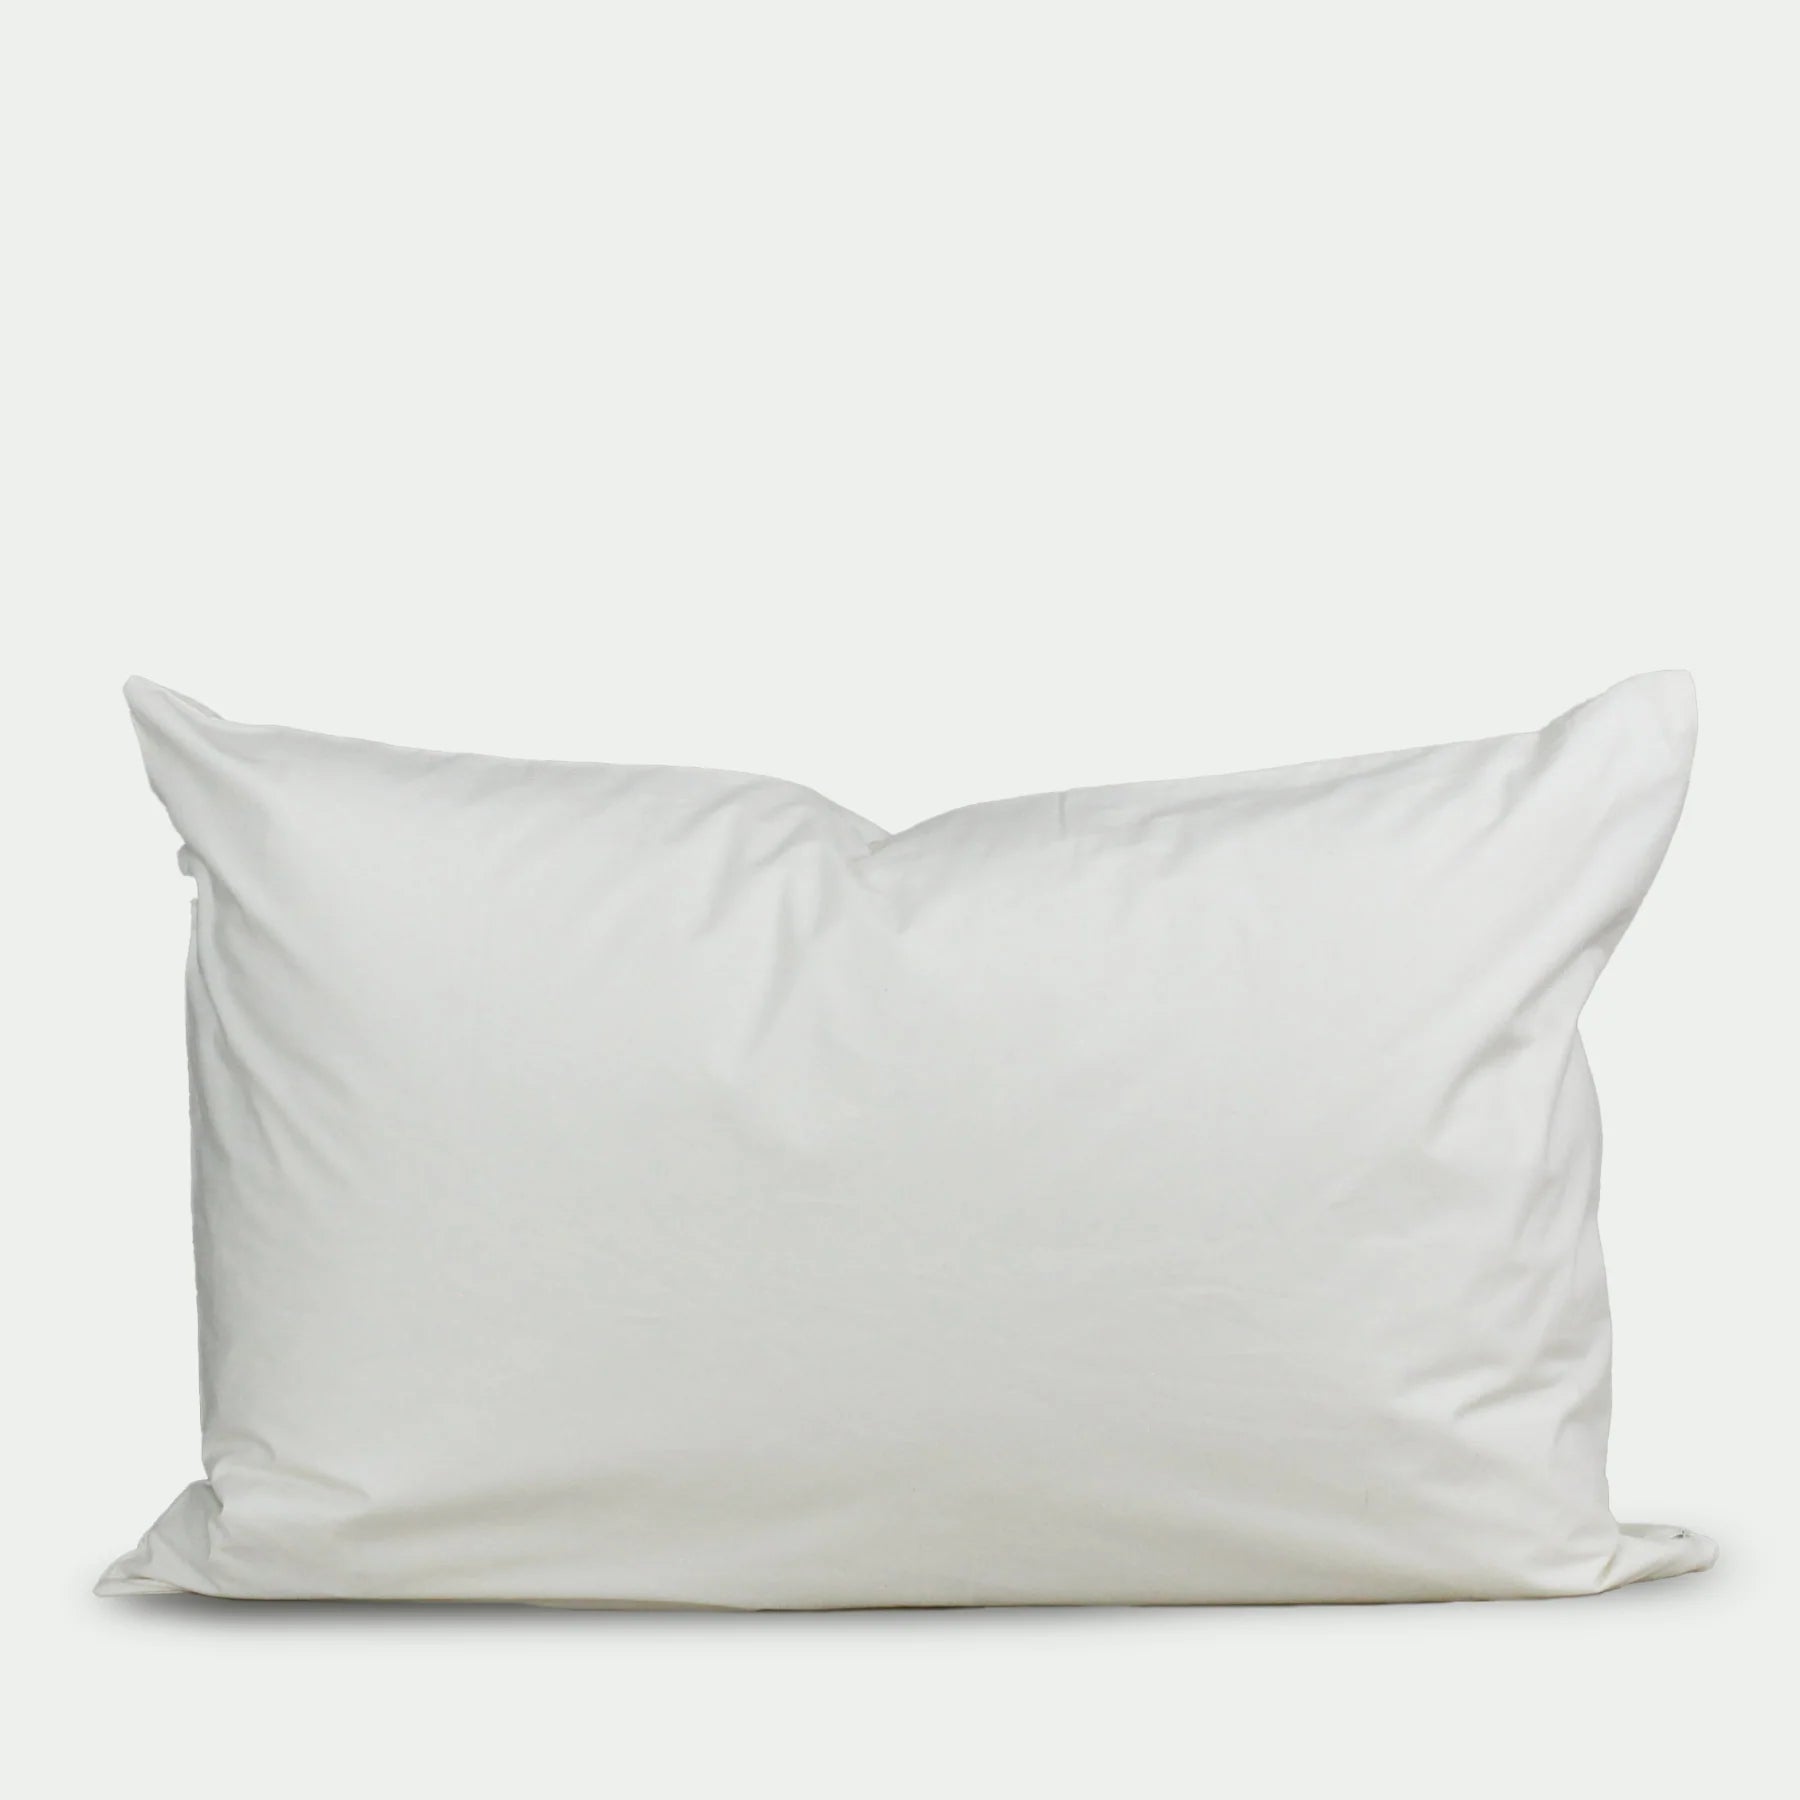 D.O.E. Down on Earth® Down and Feather Pillow Inserts with Organic Cotton Ticking